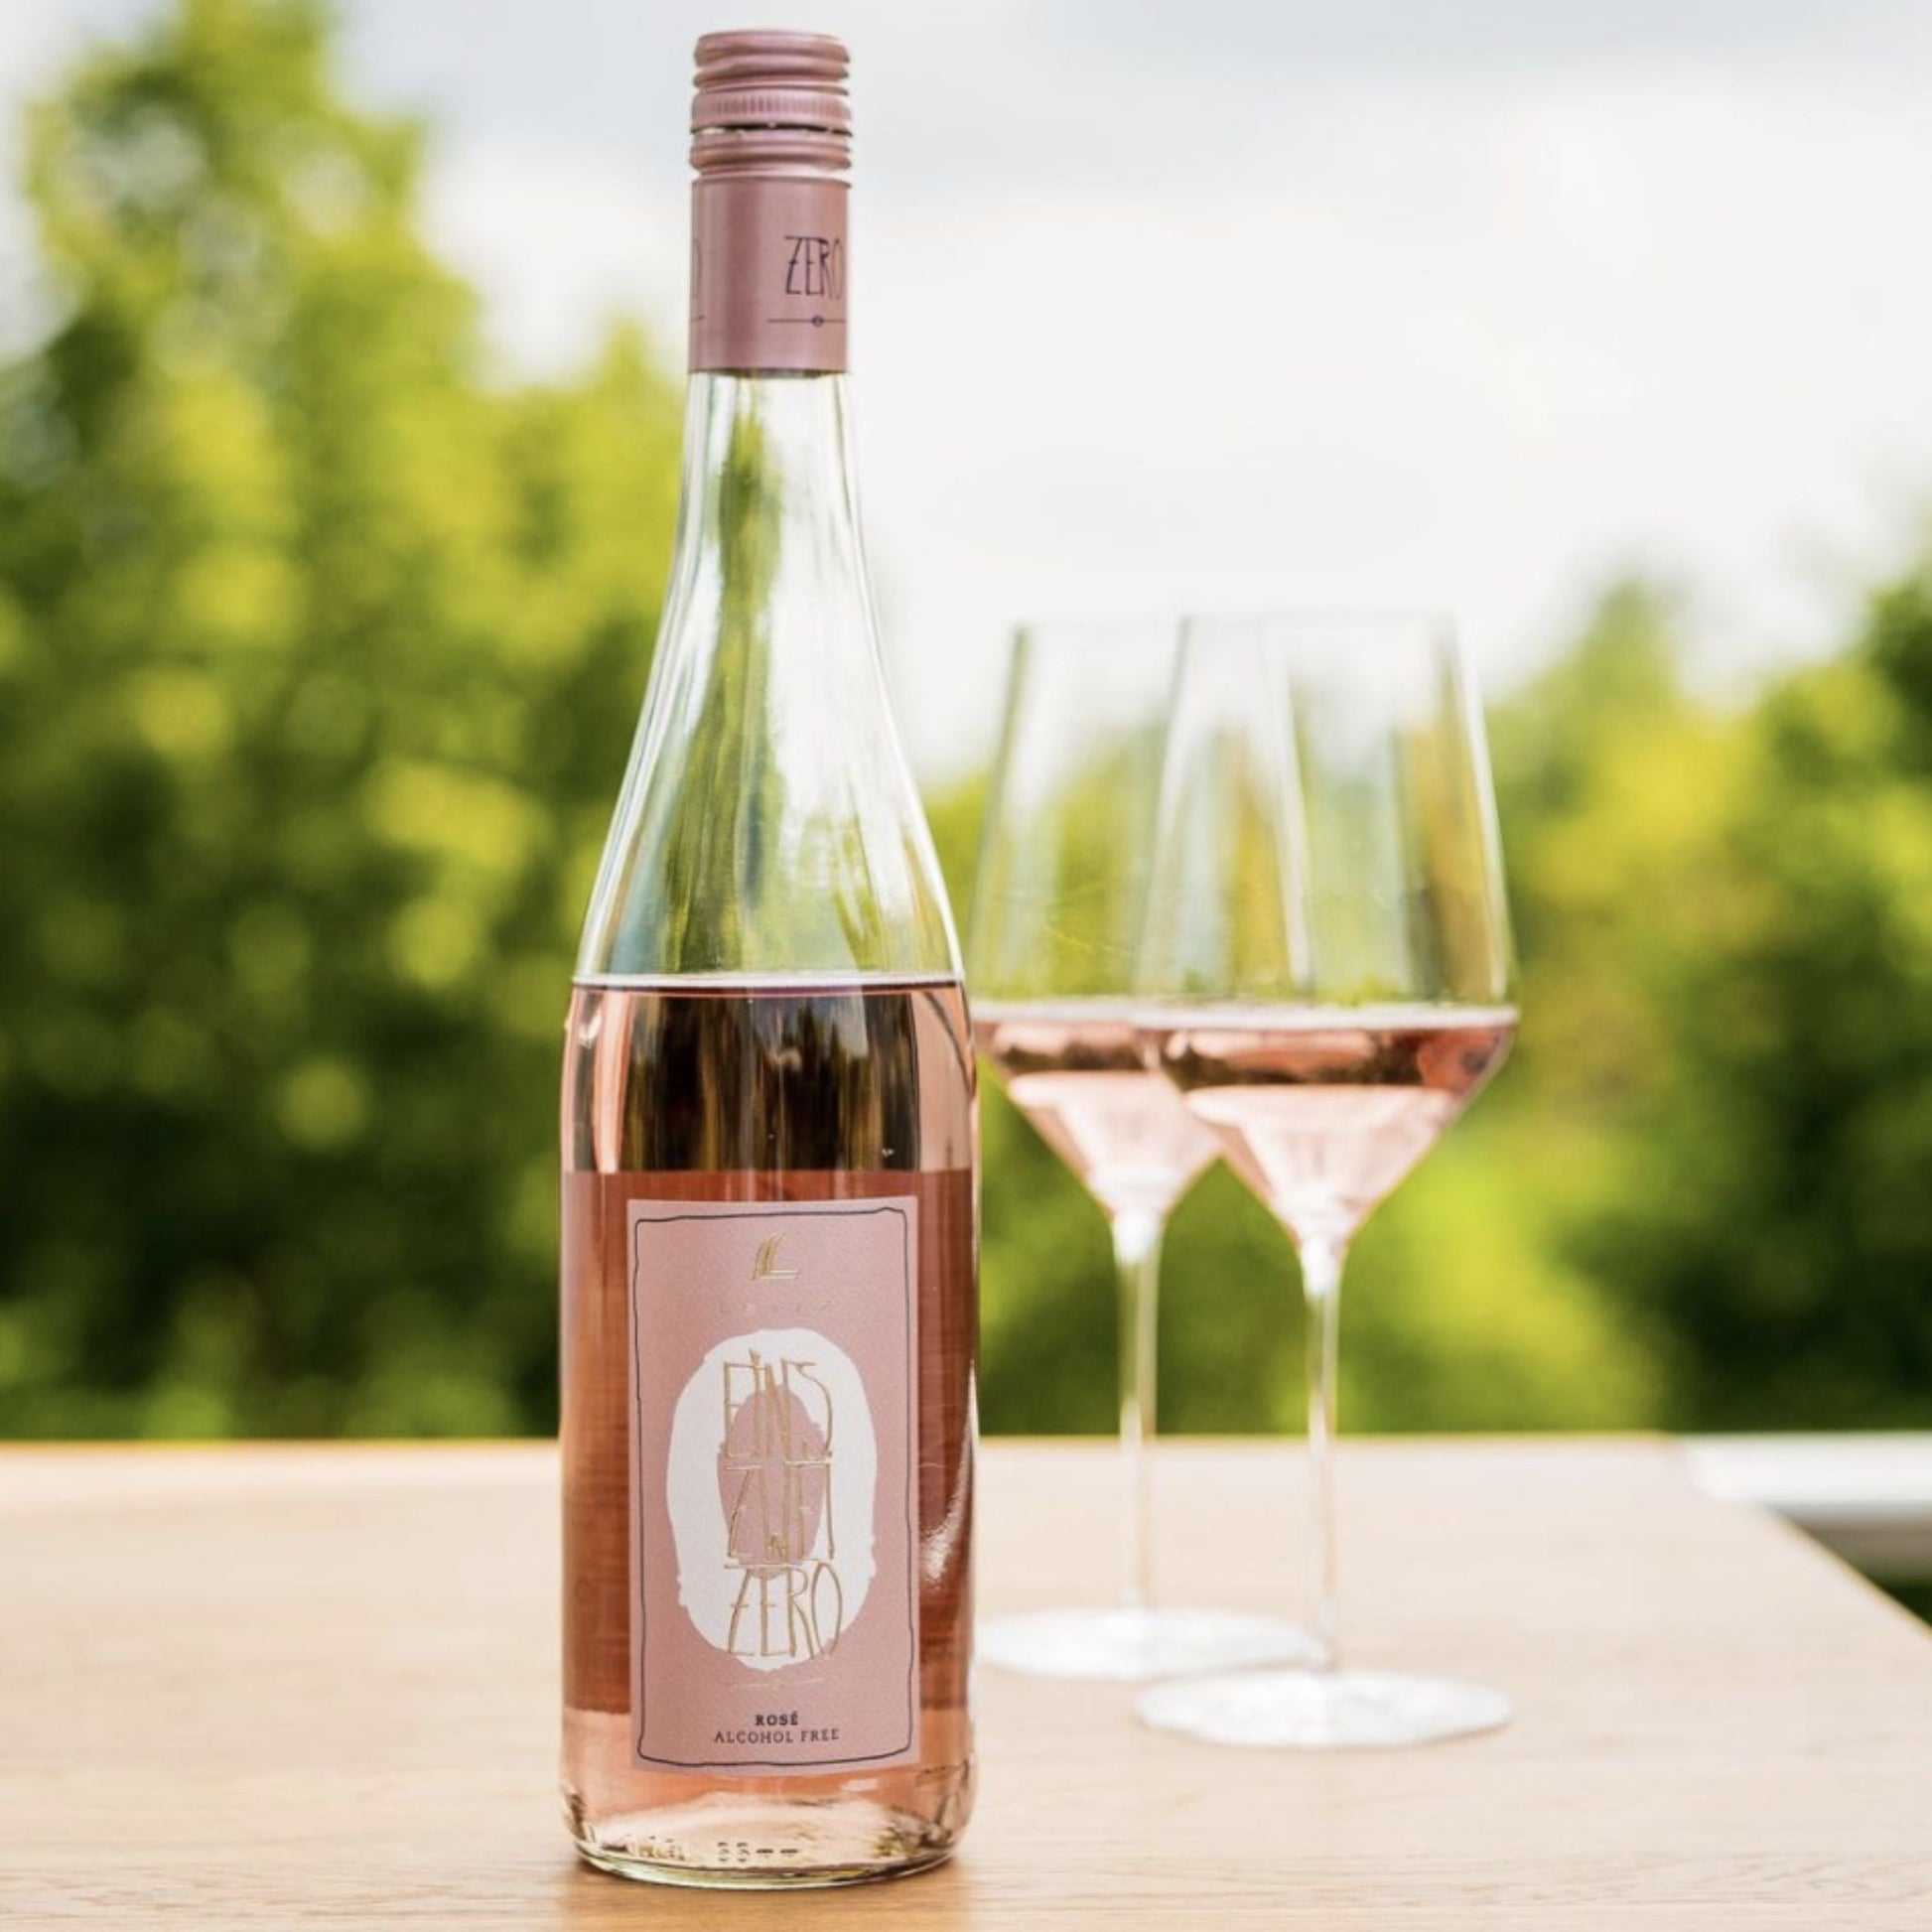 Leitz Eins-Zwei-Zero Rosé is available for sale at Knyota Drinks.